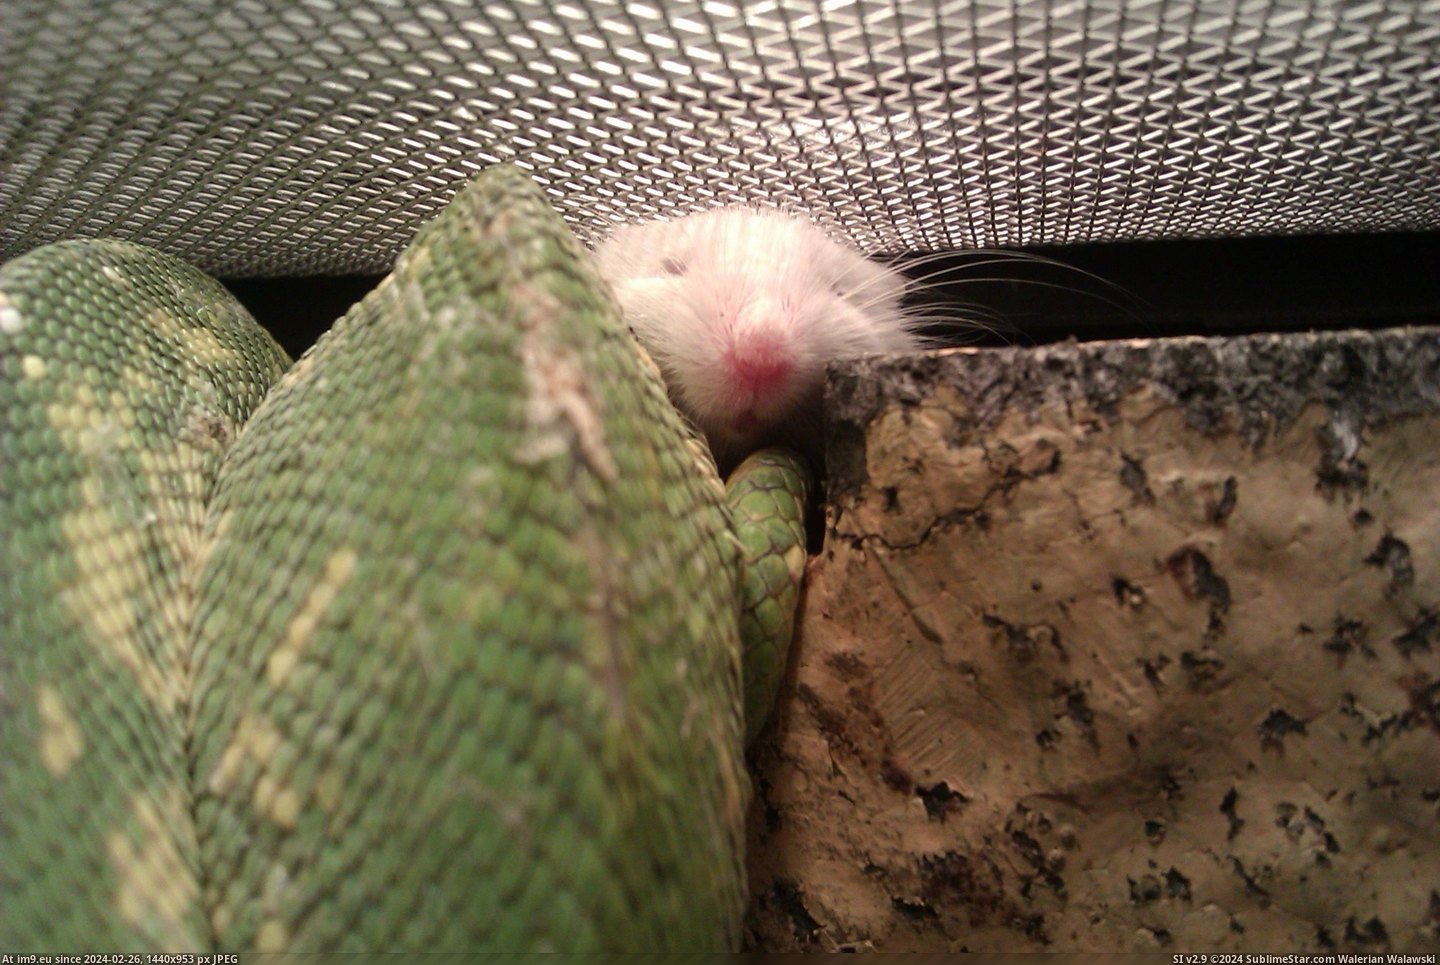 #Night #Eat #Heat #Lamp #Lived #Refuses #Togeth #Mouse #Snake #Cuddle [Aww] This snake and mouse cuddle under the heat lamp every night. He refuses to eat this particular mouse. They've lived togeth Pic. (Obraz z album My r/AWW favs))